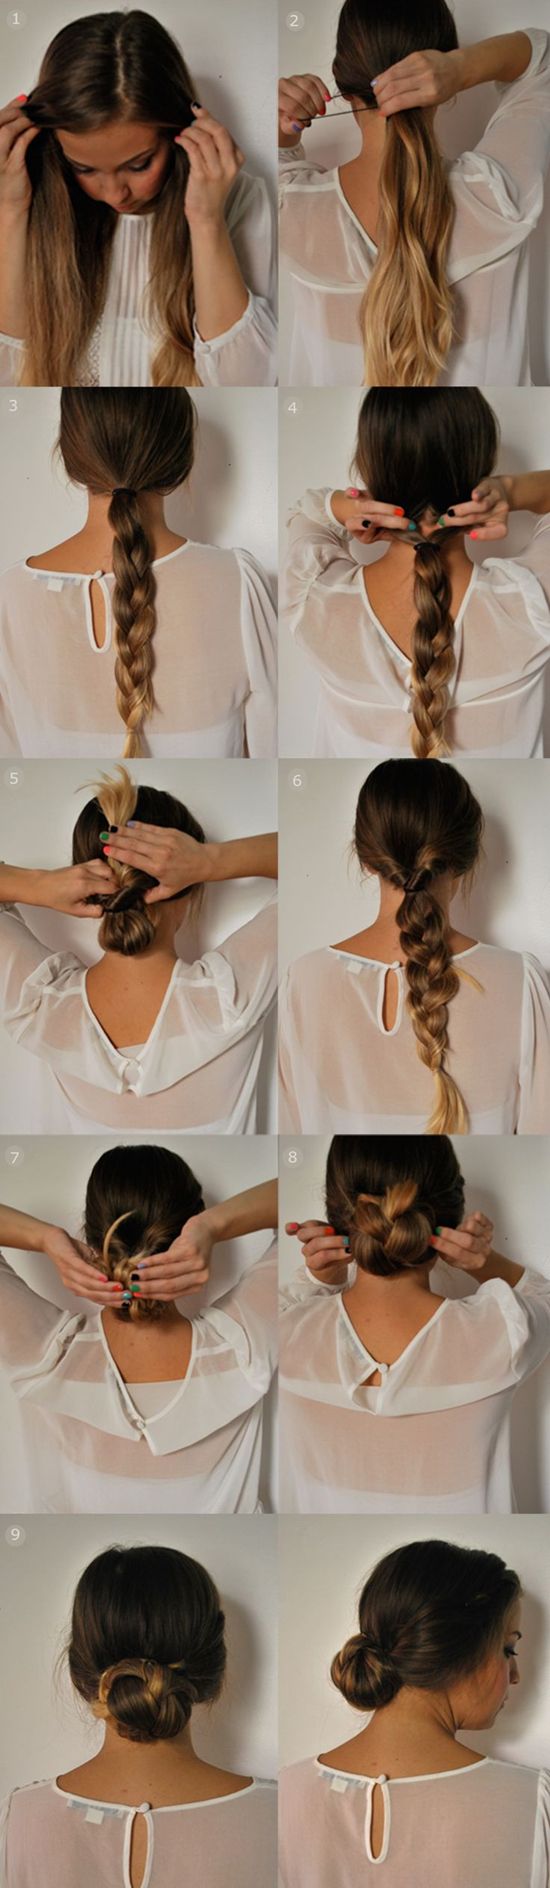 Cute braided hairstyles for short hair | Be Beautiful India